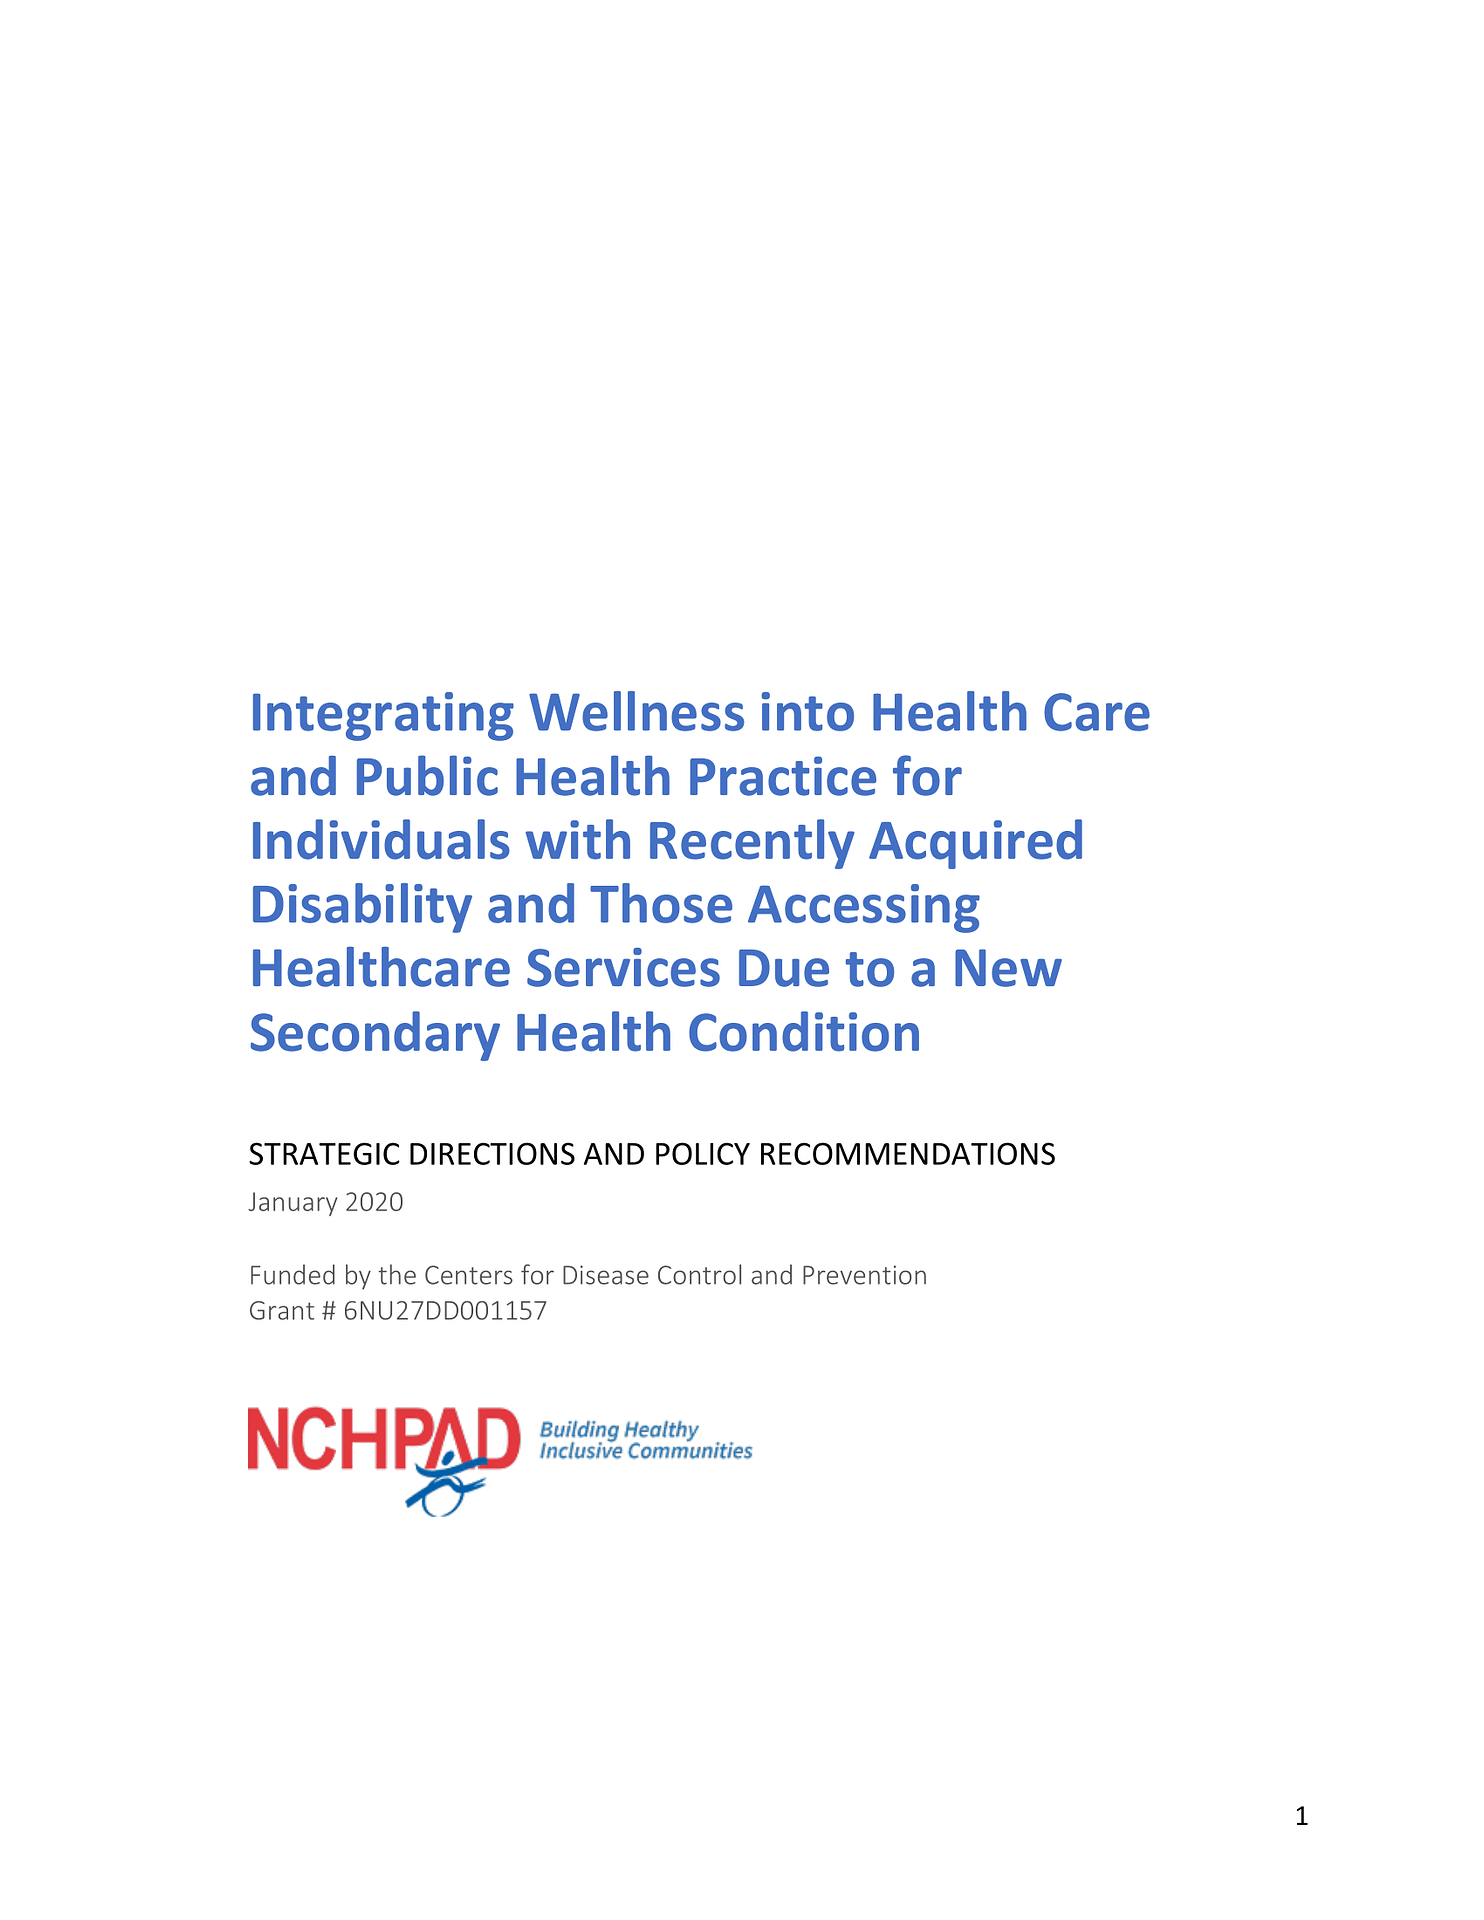 NCHPAD's Stages of Wellness poster